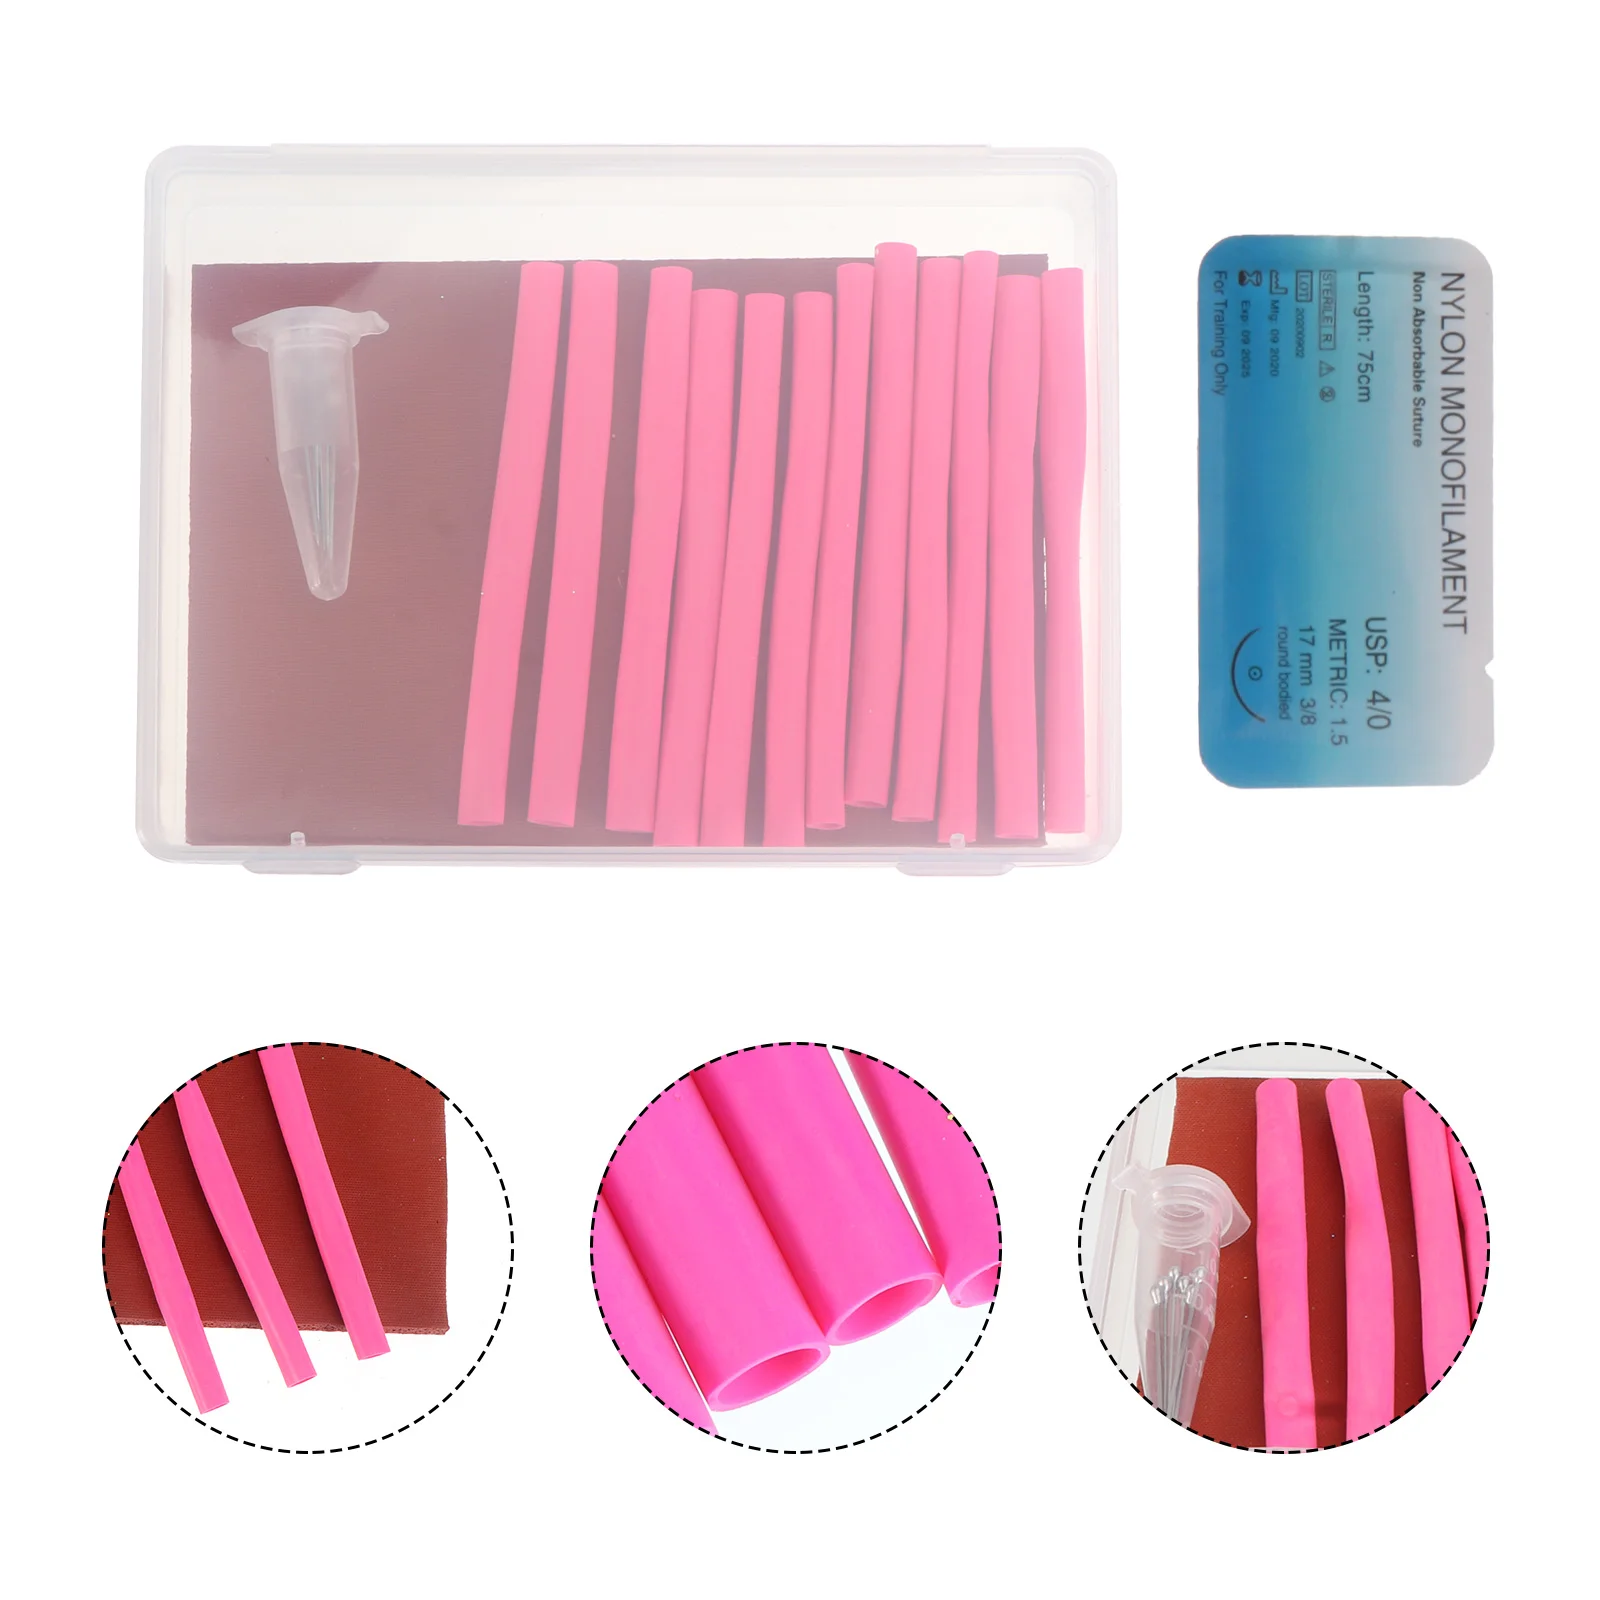 

Vascular Anastomosis Exercise Mould Rubber Teaching Aids Suture Model Blood Vessels Tool Mold